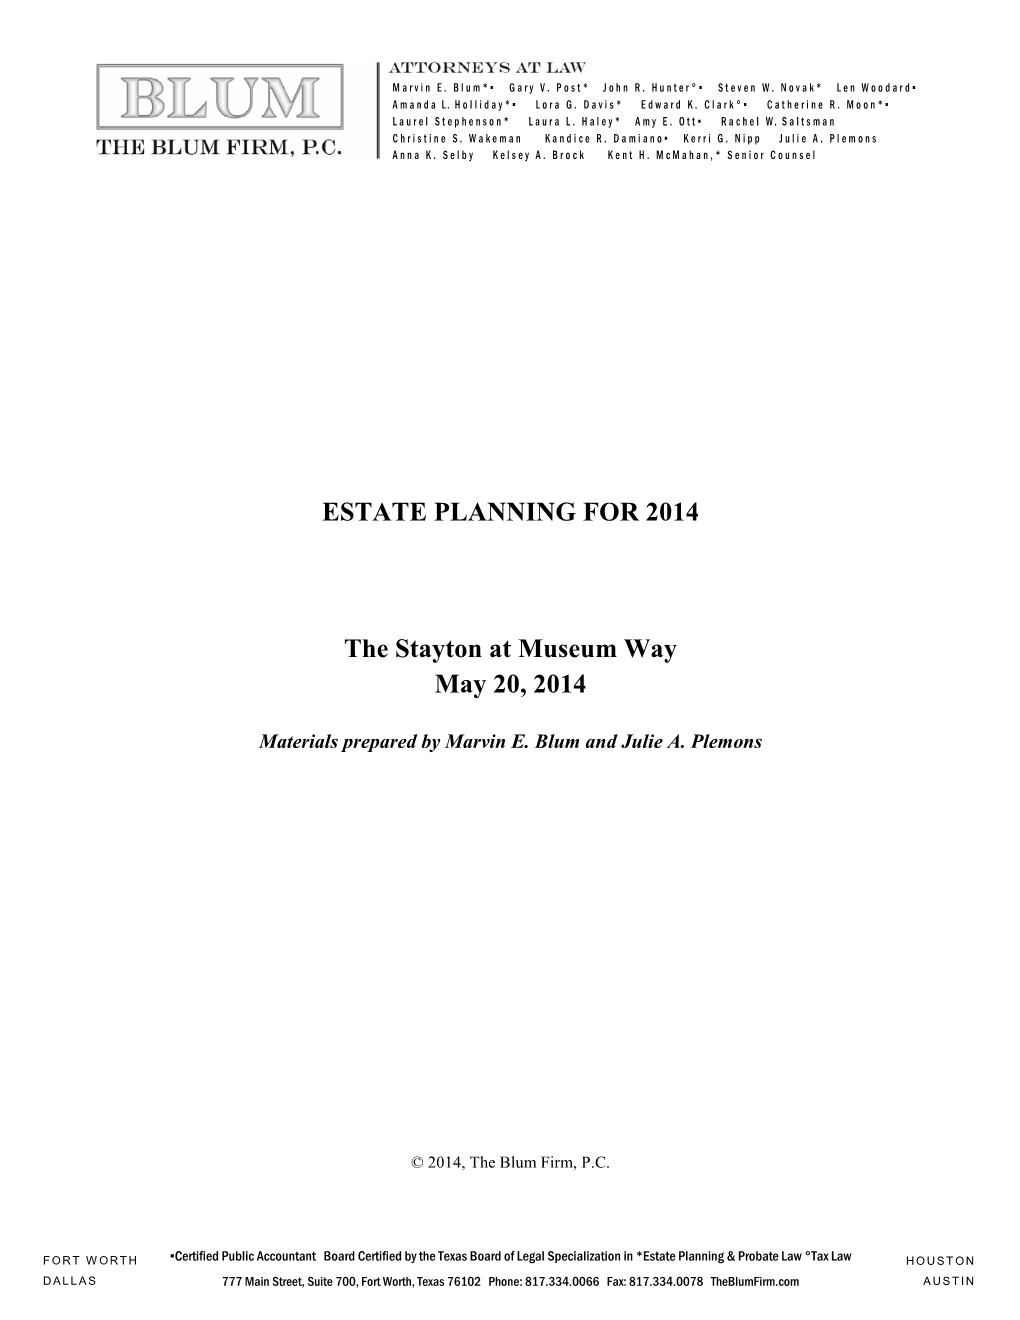 ESTATE PLANNING for 2014 the Stayton at Museum Way May 20